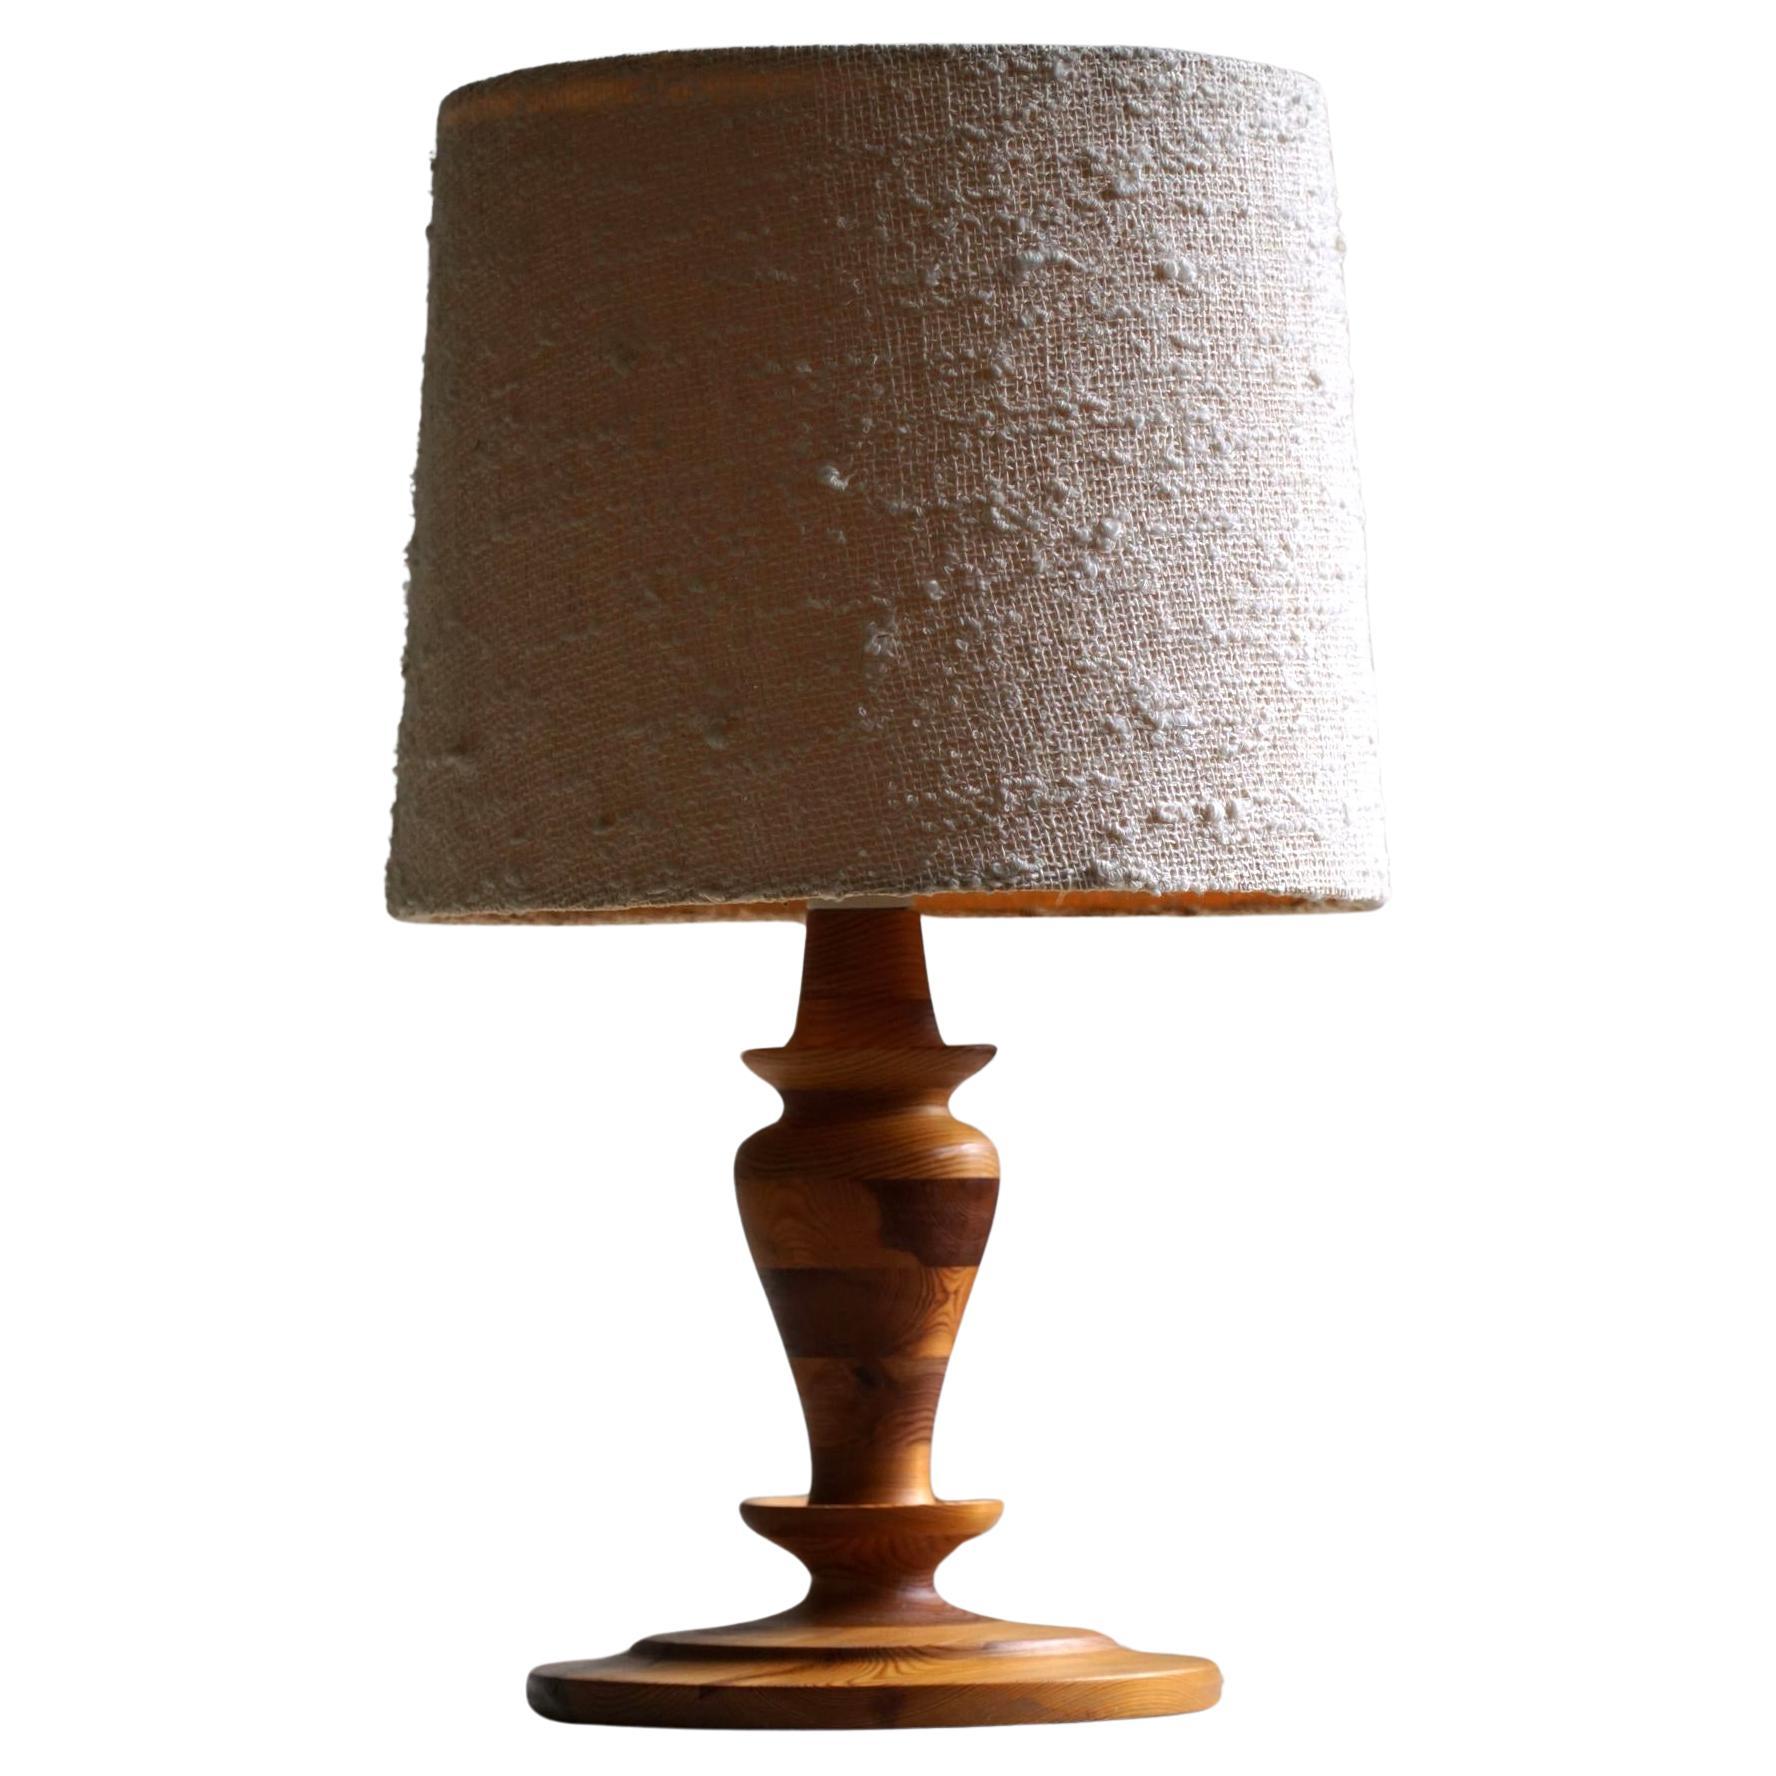 Swedish Modern Table Lamp in Solid Pine, Mid Century, 1960s For Sale